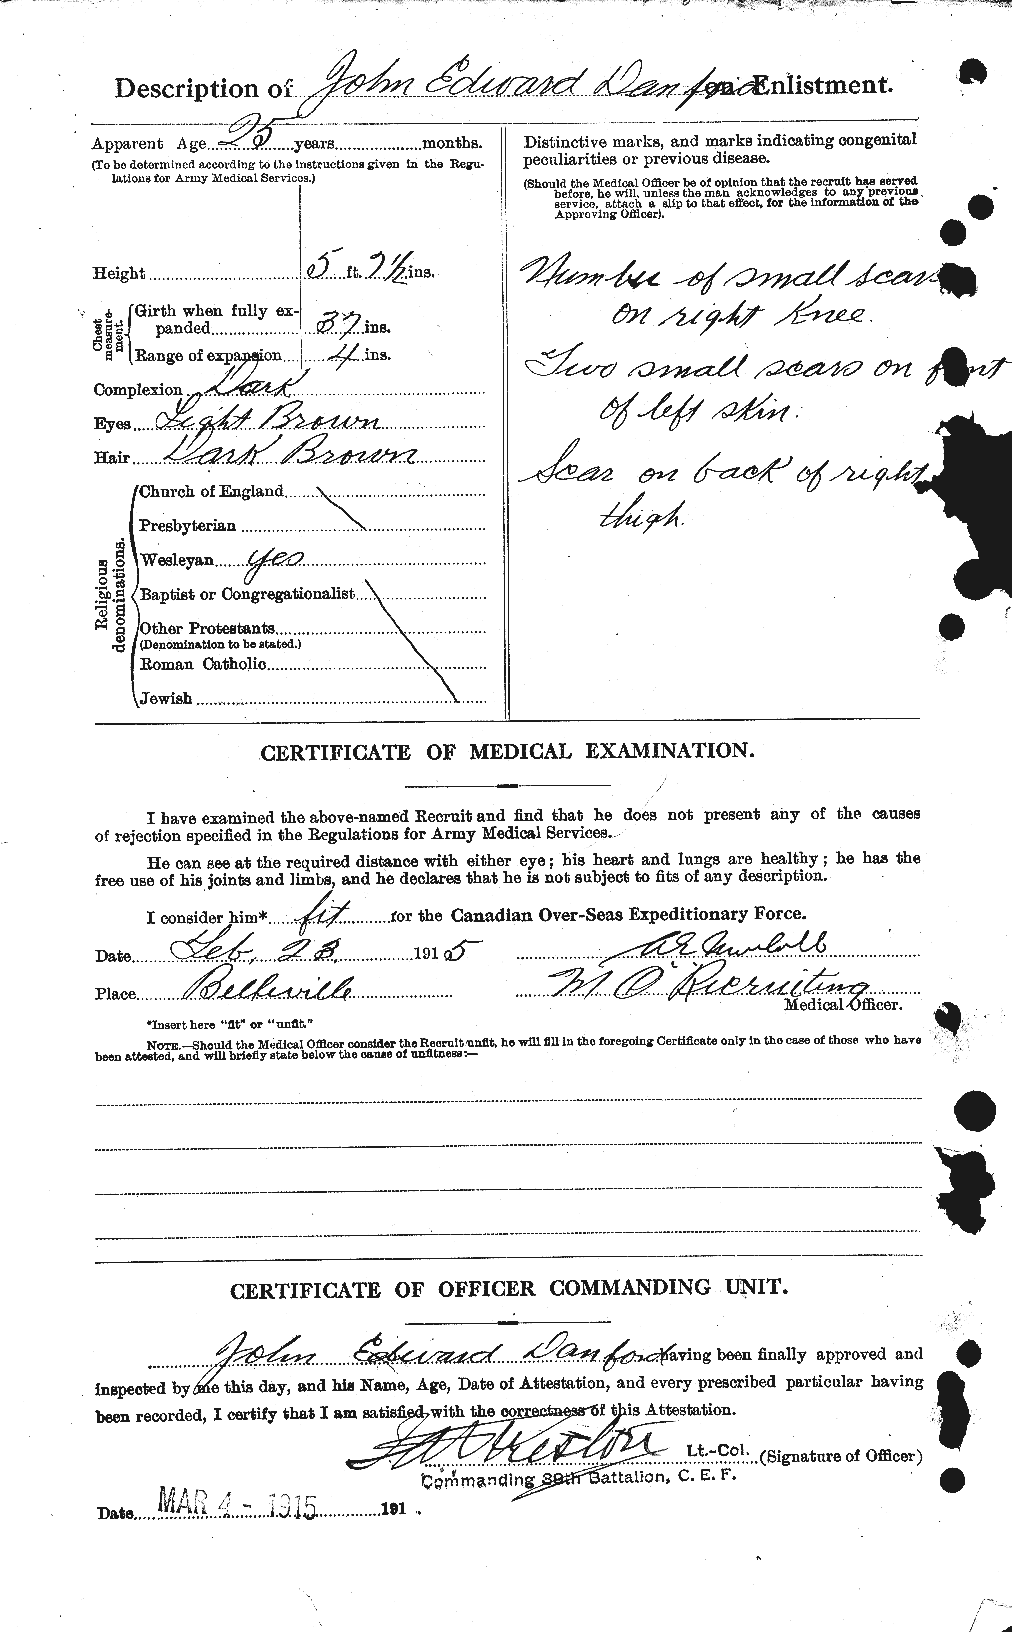 Personnel Records of the First World War - CEF 277969b